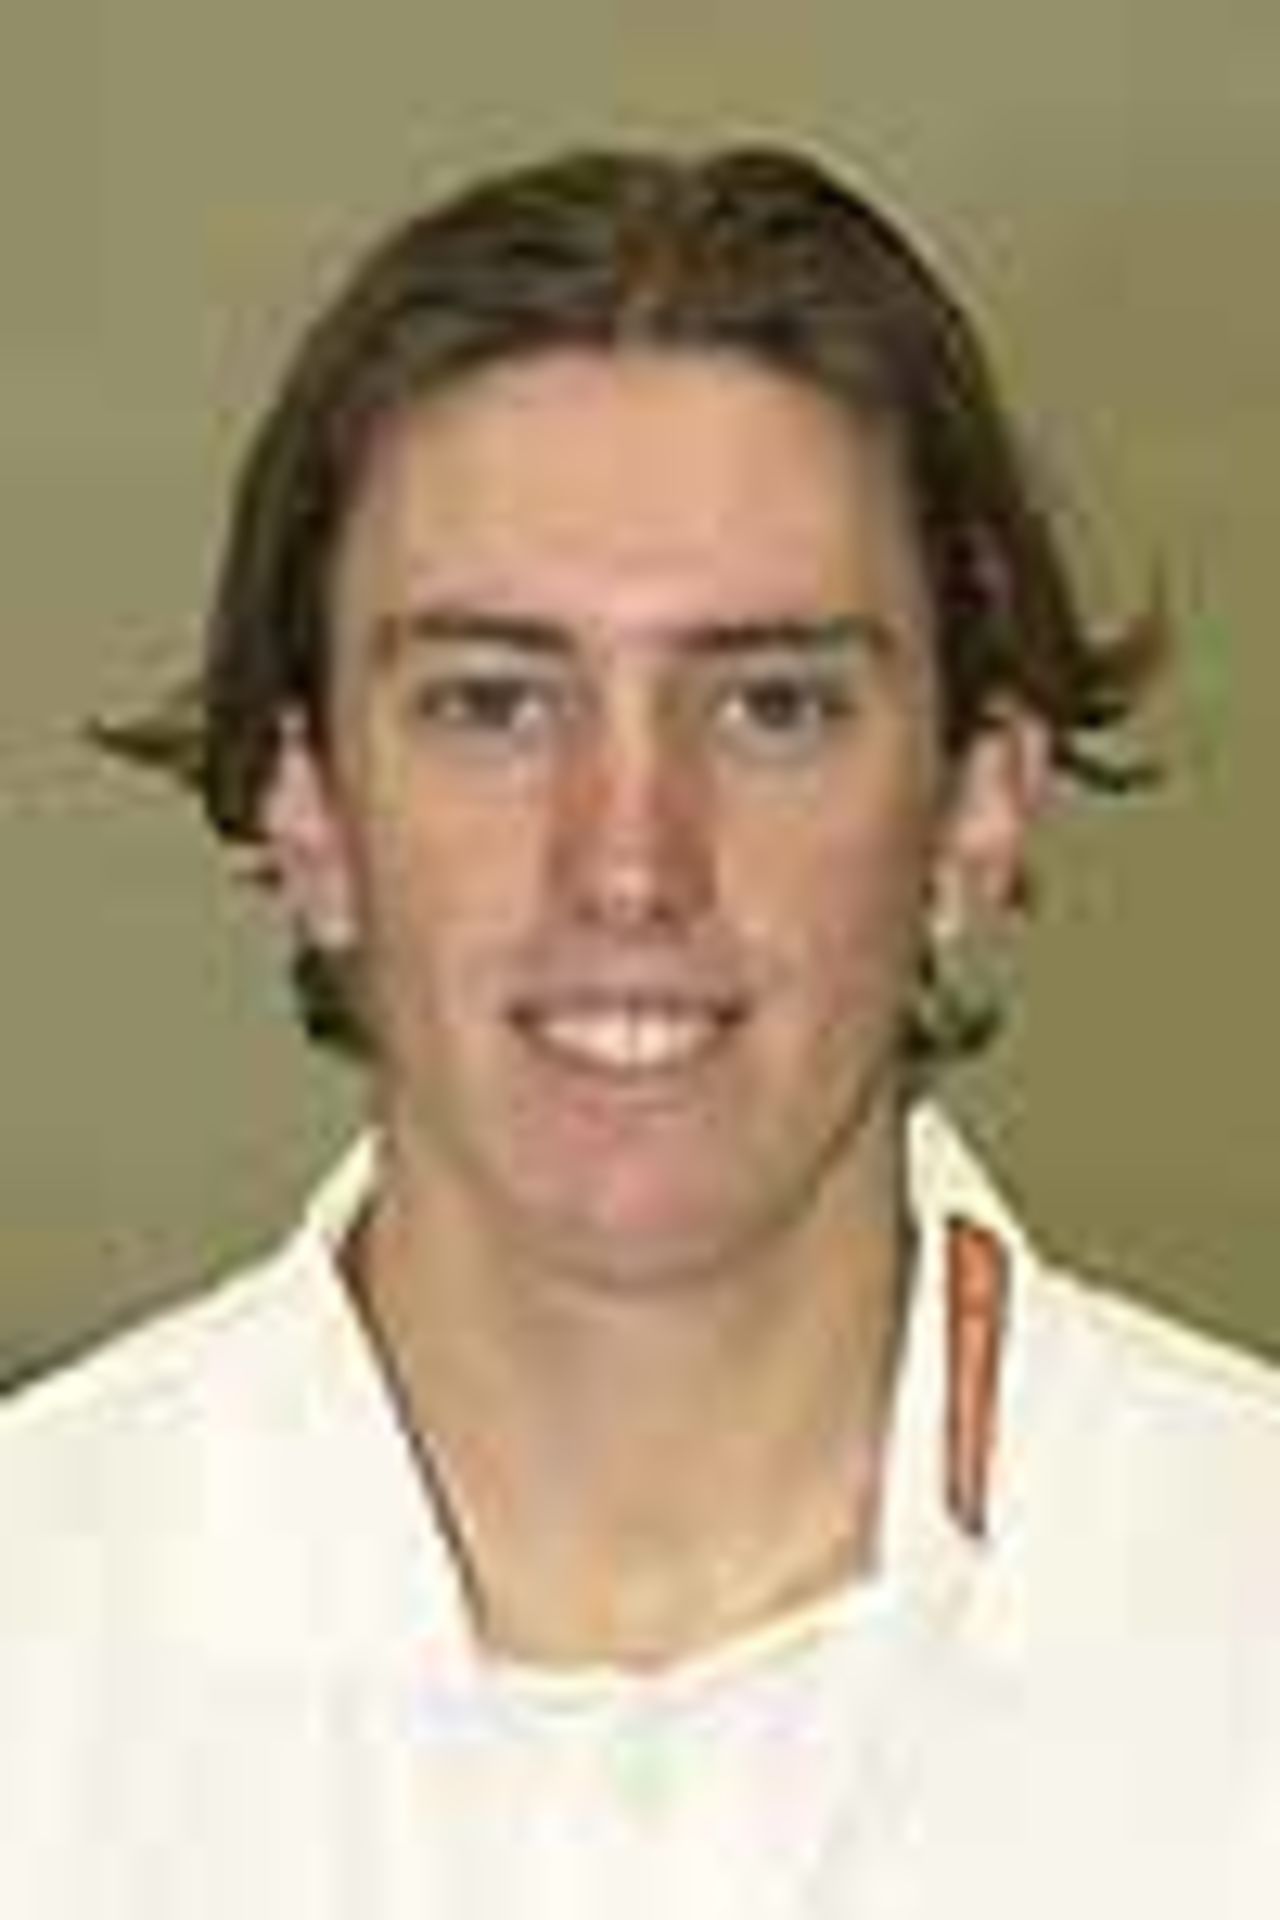 Pictured at the April 2001 Yorkshire CCC Photocall